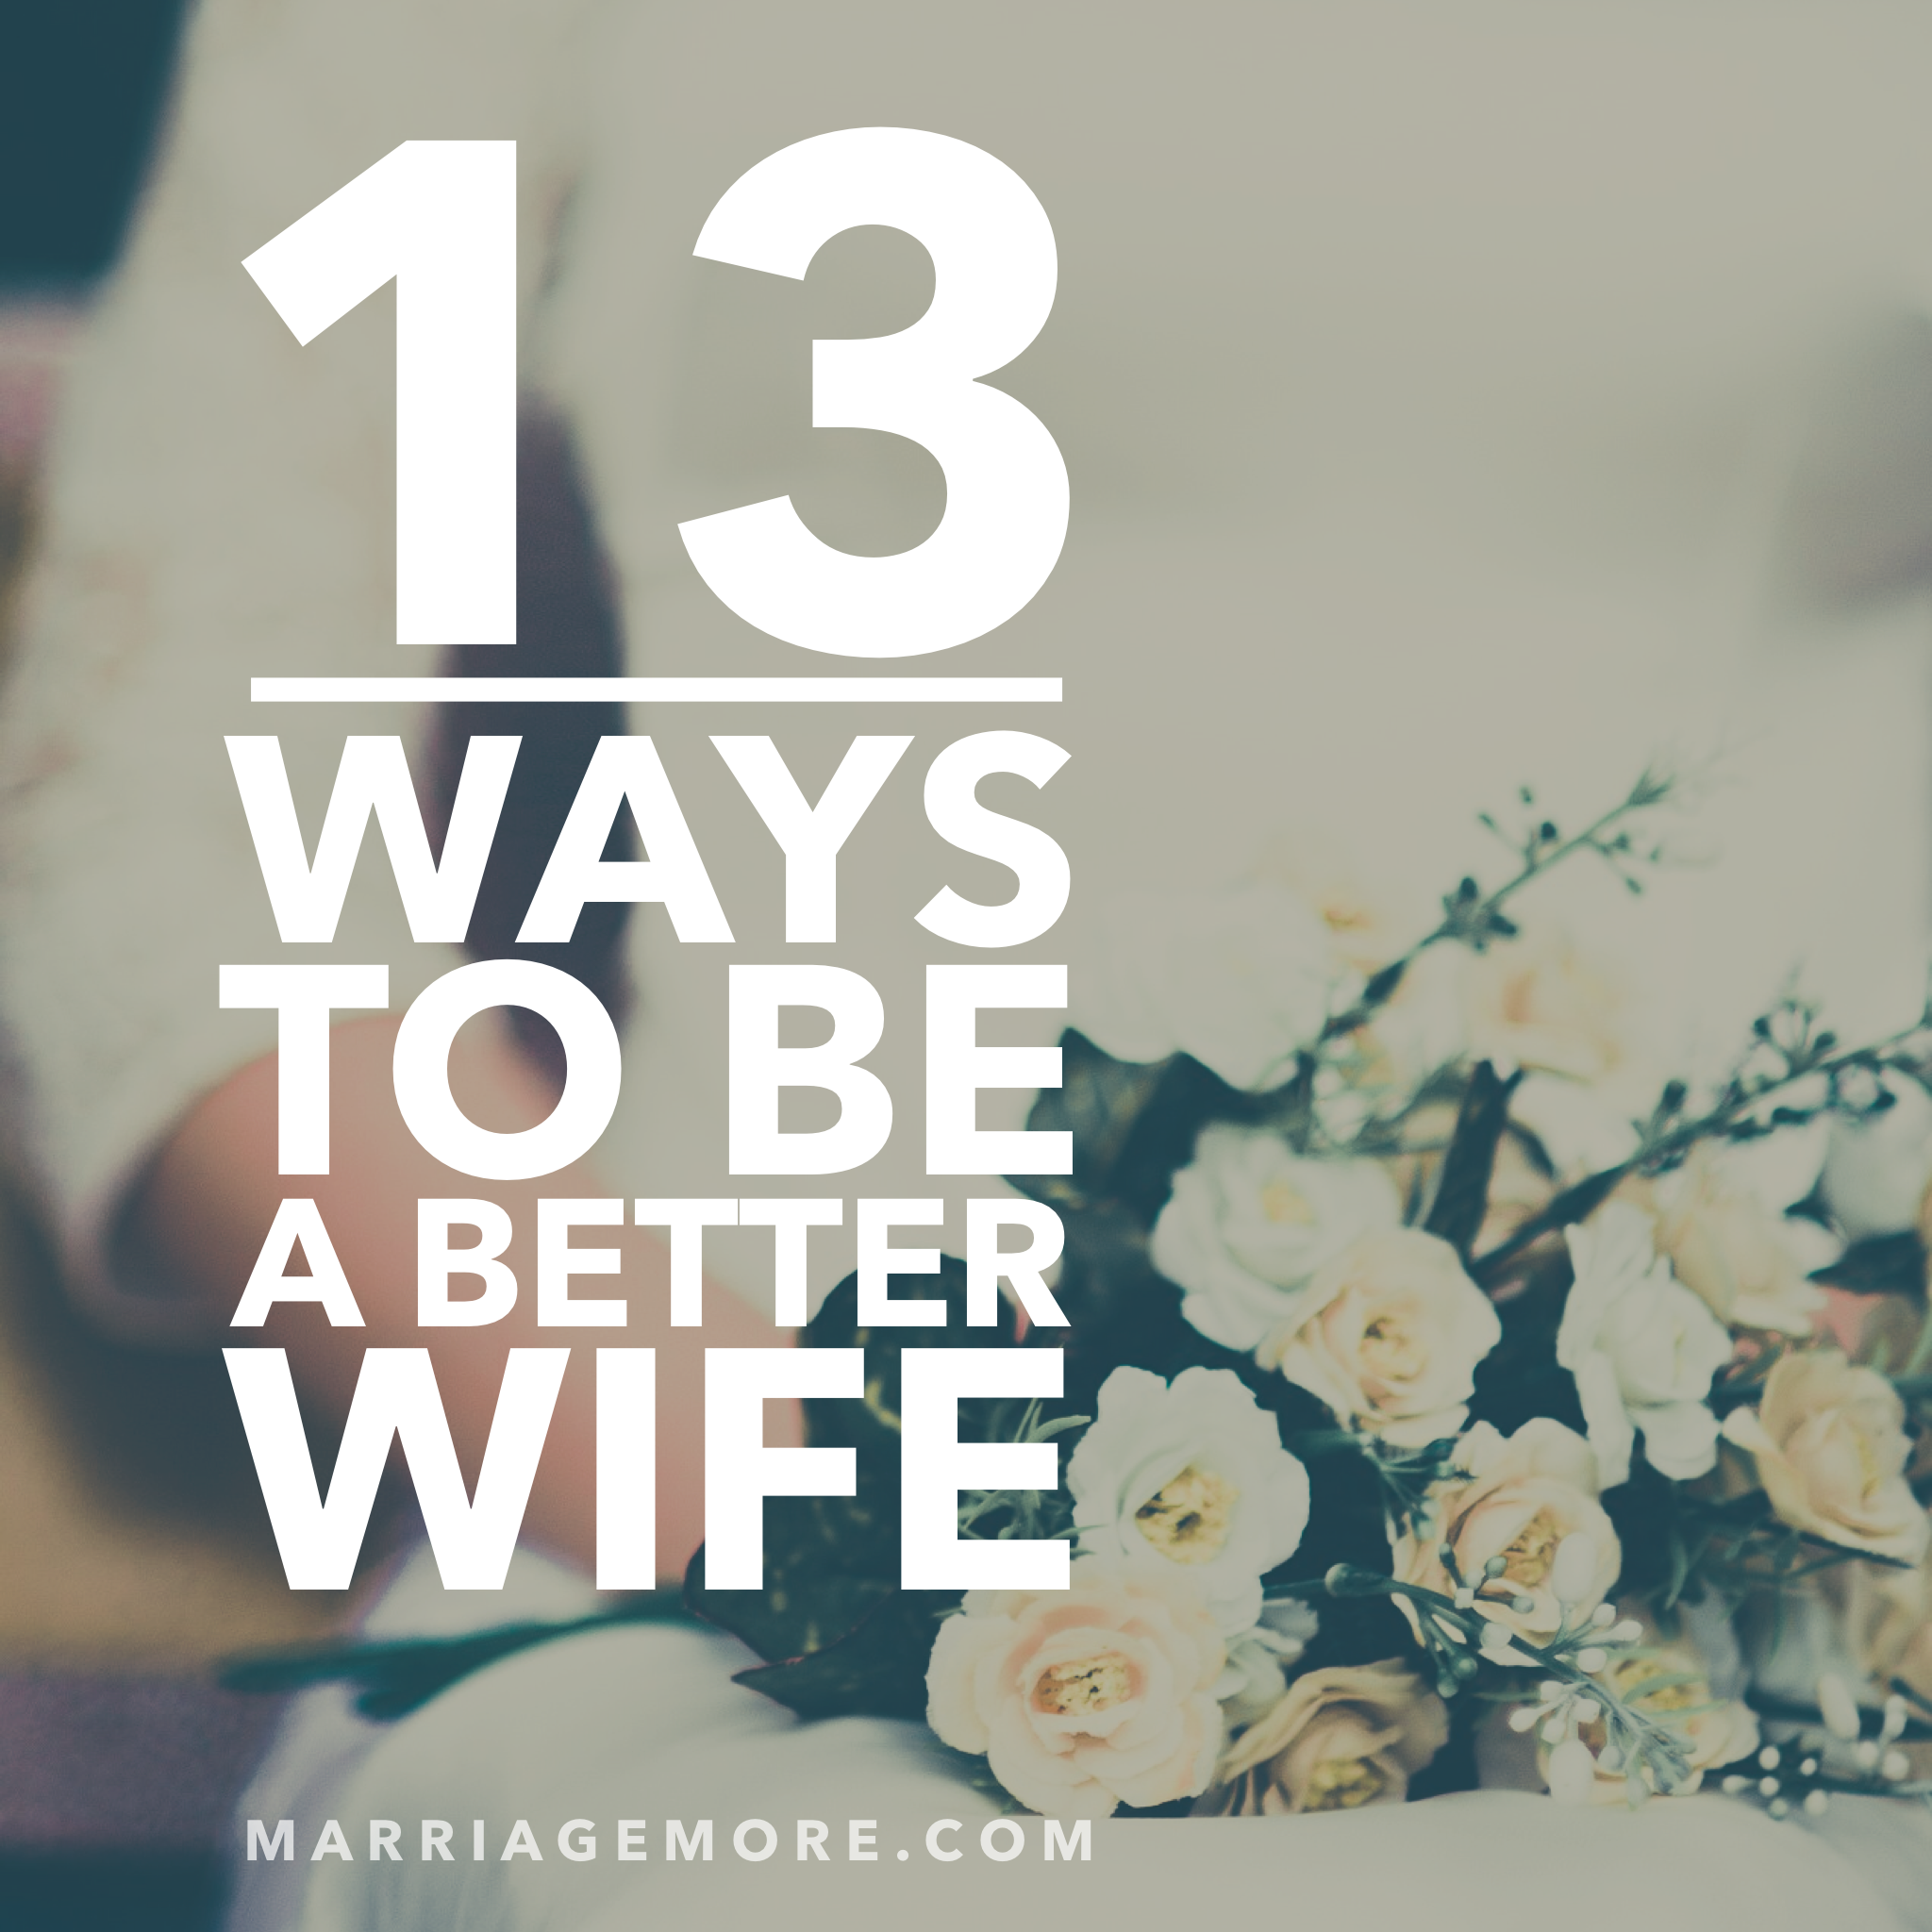 13 Ways To Be A Better WIfe from houseofroseblog.com